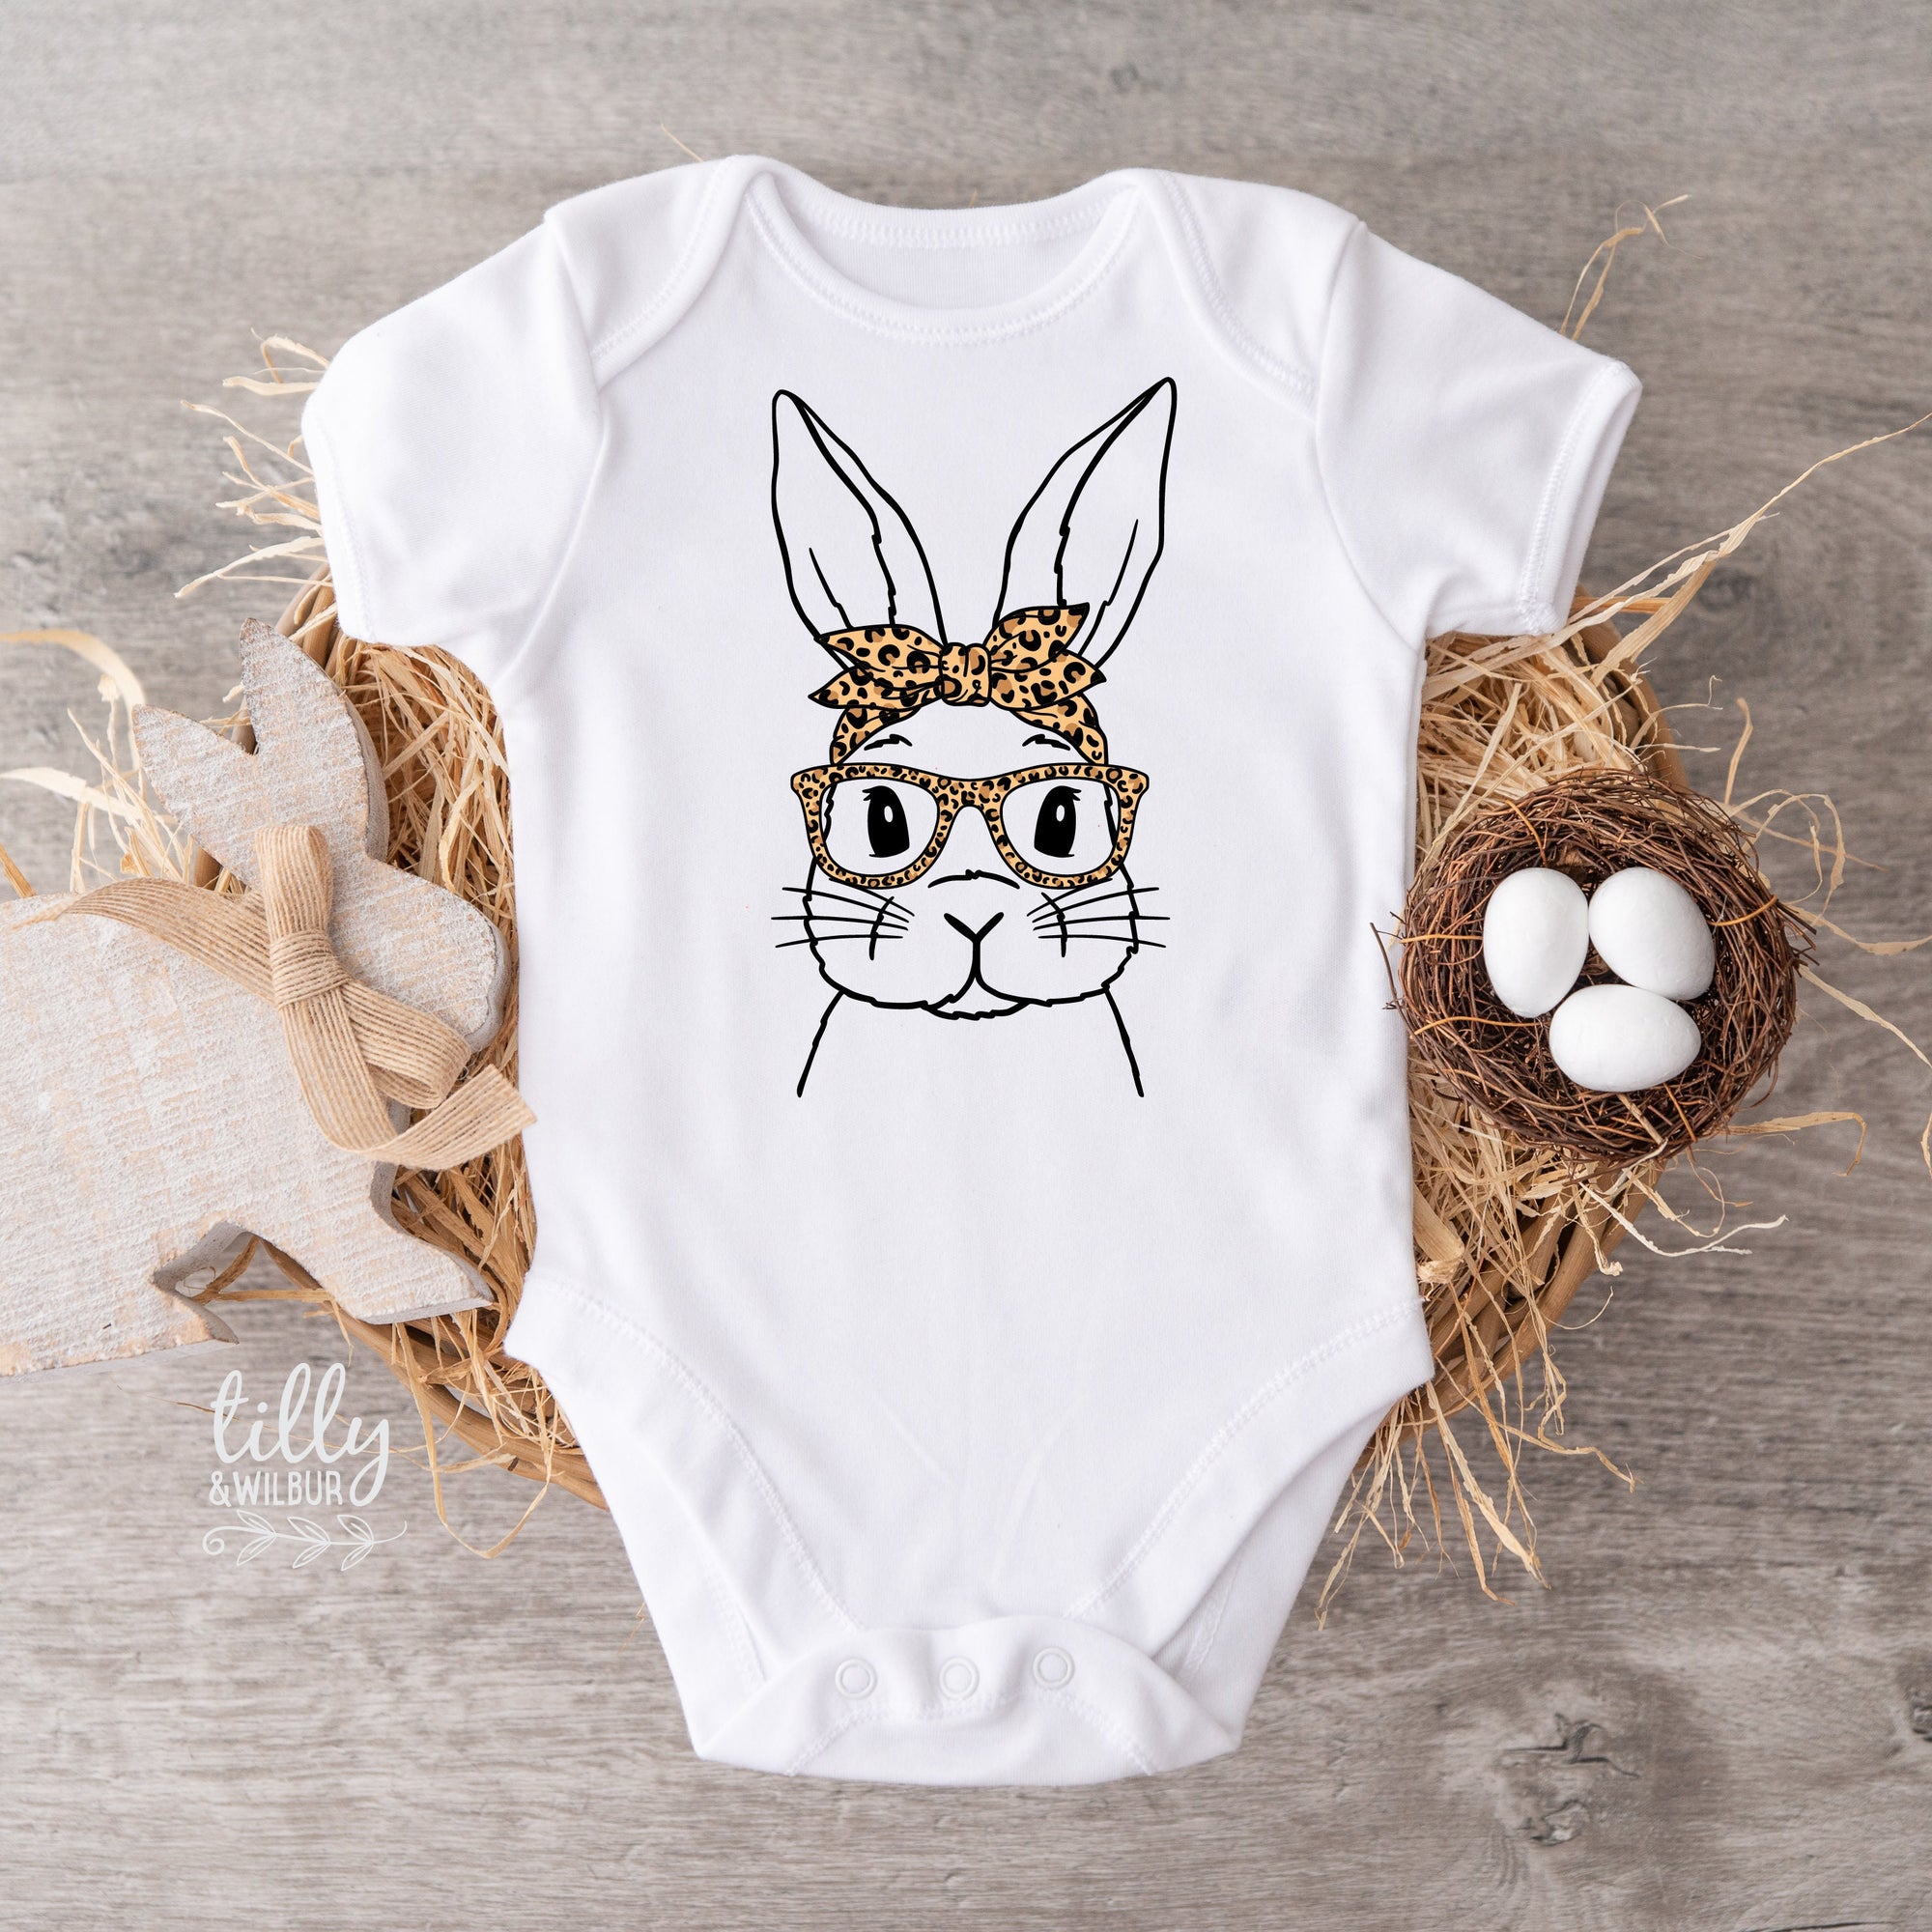 Easter Onesie, My 1st Easter Baby Bodysuit, First Easter Baby Bodysuit, Newborn Easter Gift, 1st Easter Outfit, Baby's 1st Easter, Leopard